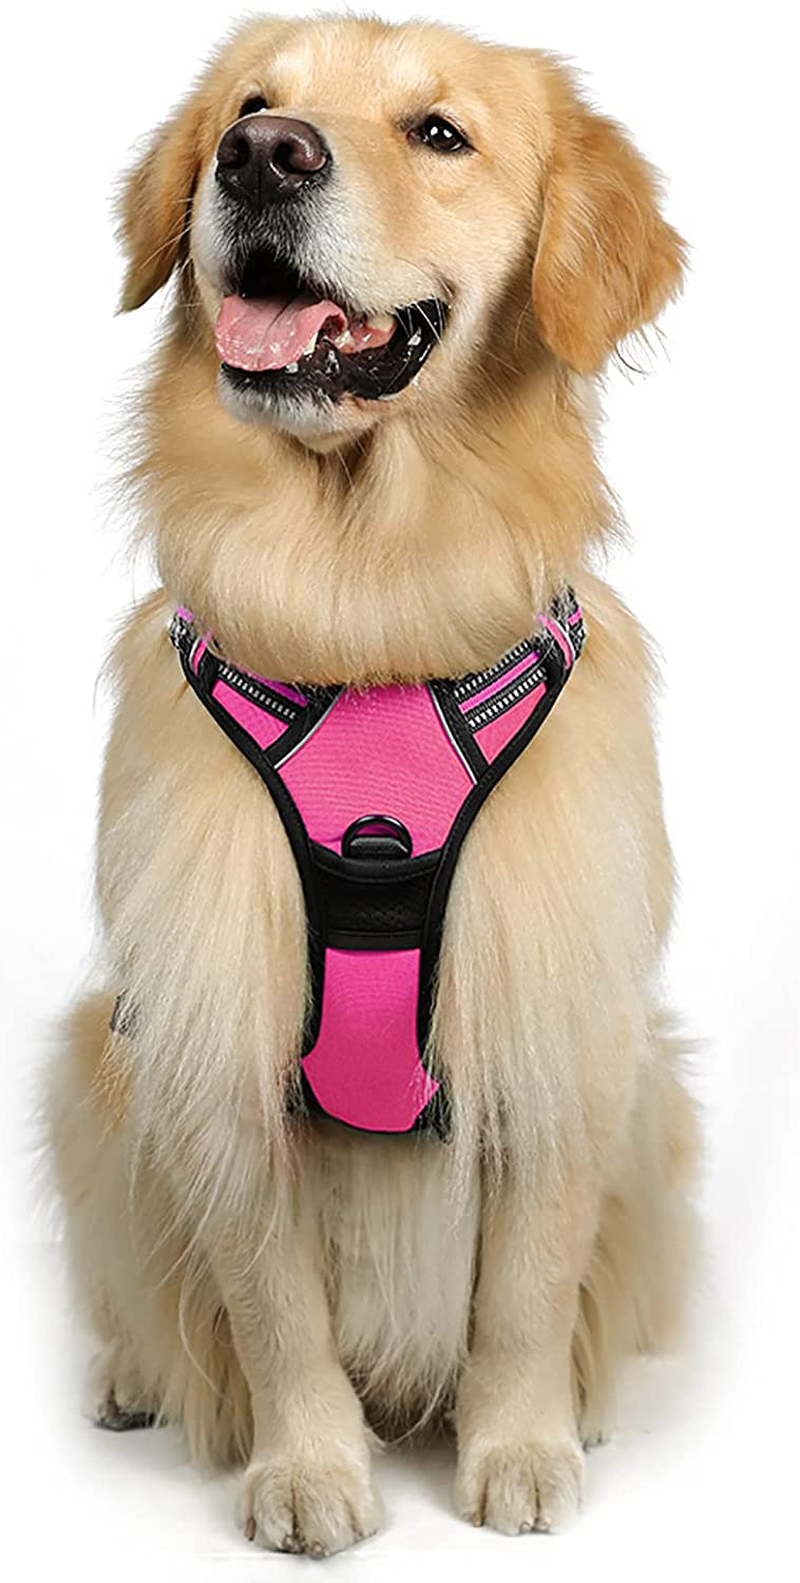 rabbitgoo Dog Harness, No-Pull Pet Harness with 2 Leash Clips, Adjustable Soft Padded Dog Vest, Reflective No-Choke Pet Oxford Vest with Easy Control Handle for Large Dogs, Black, XL  rabbitgoo Rose Red X-Large 